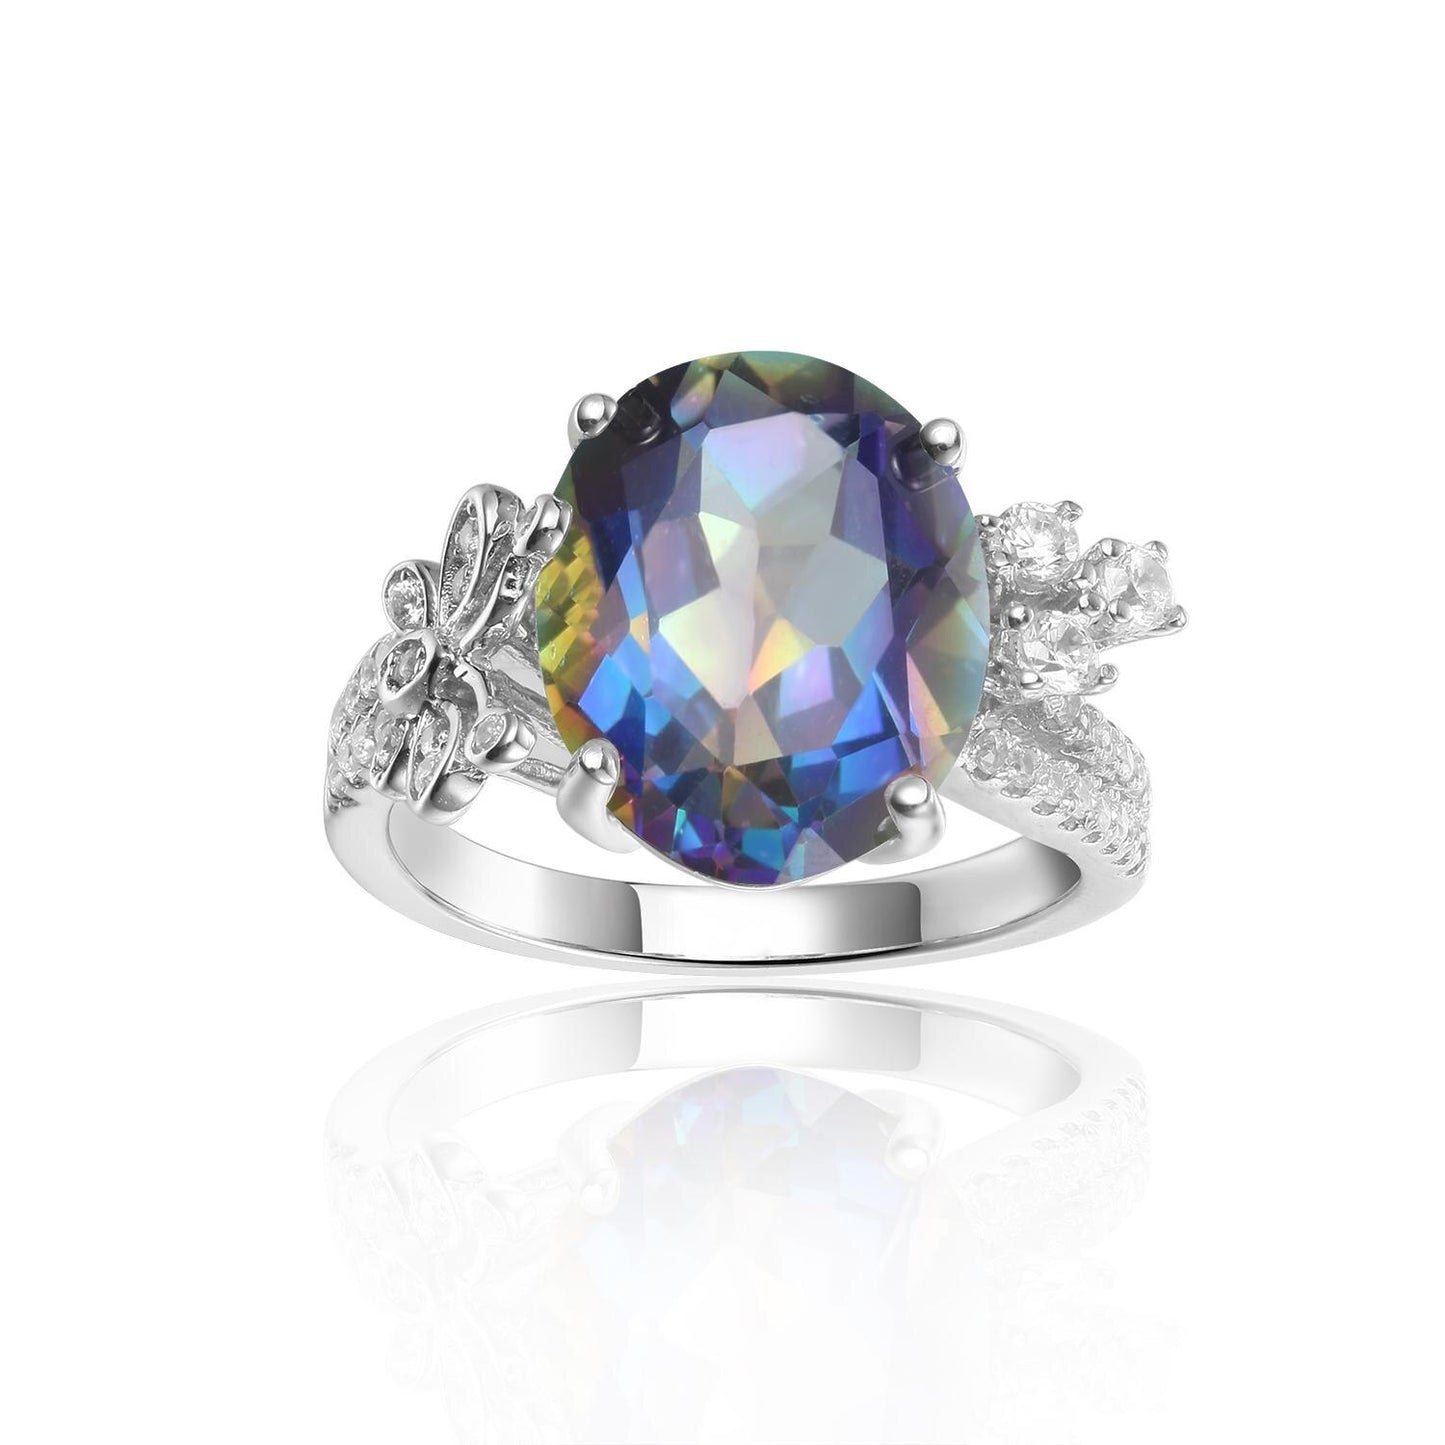 GEM&#39;S BALLET 4.36Ct 10x12mm Oval Rainbow Mystic Topaz Gemstone Promise Engagement Rings in Sterling Silver Gift For Her Blueish|925 Sterling Silver